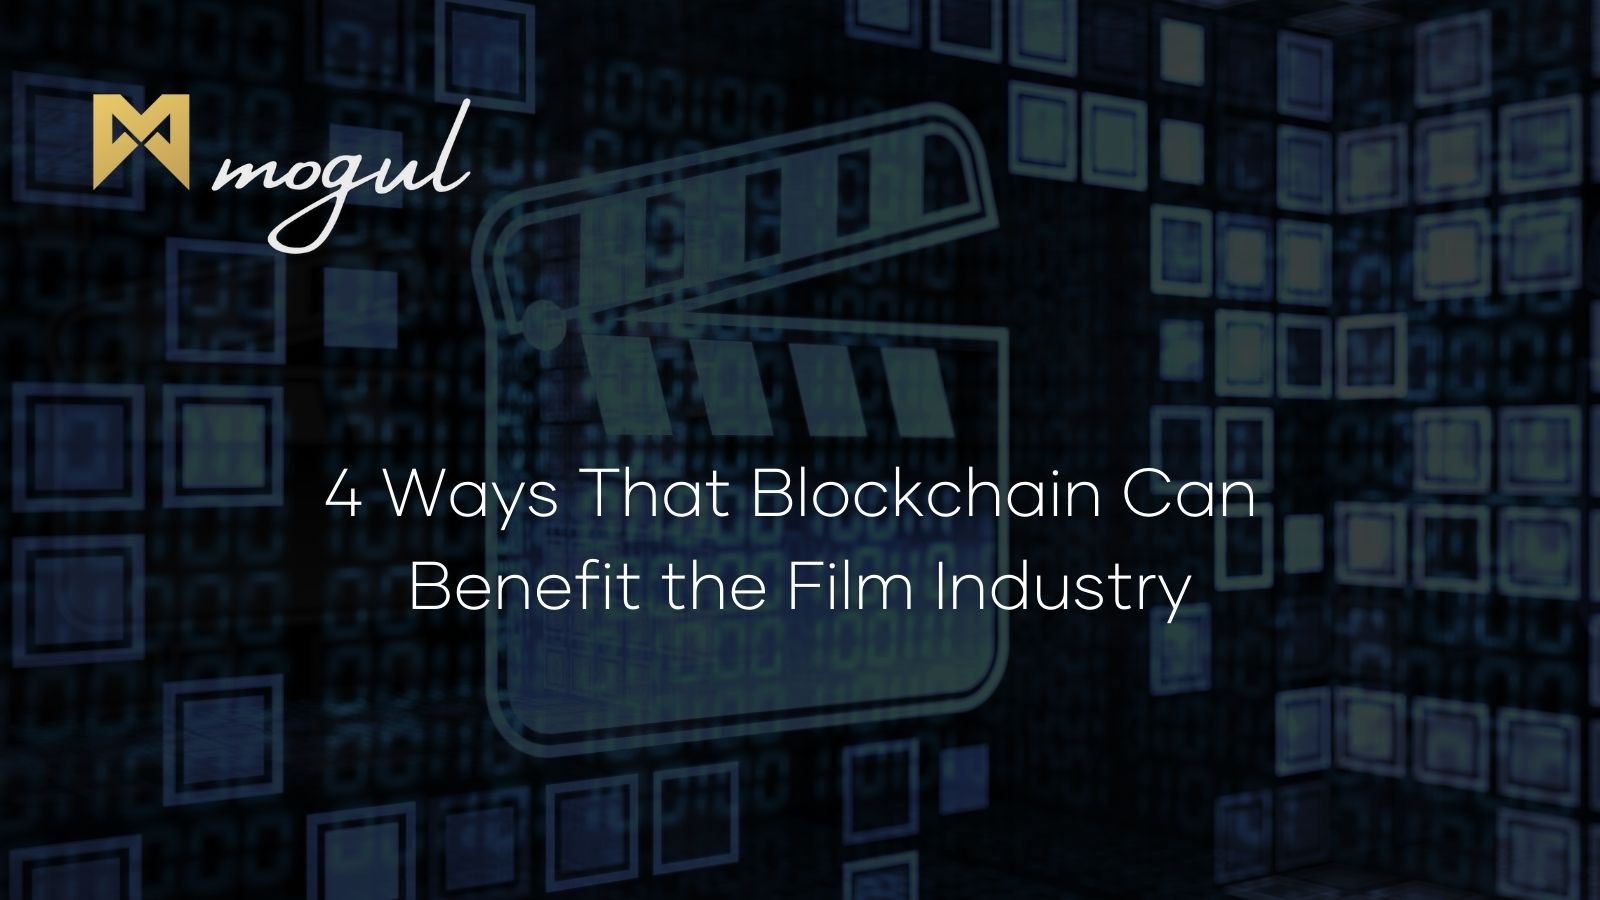 4 Ways That Blockchain Can Benefit the Film Industry